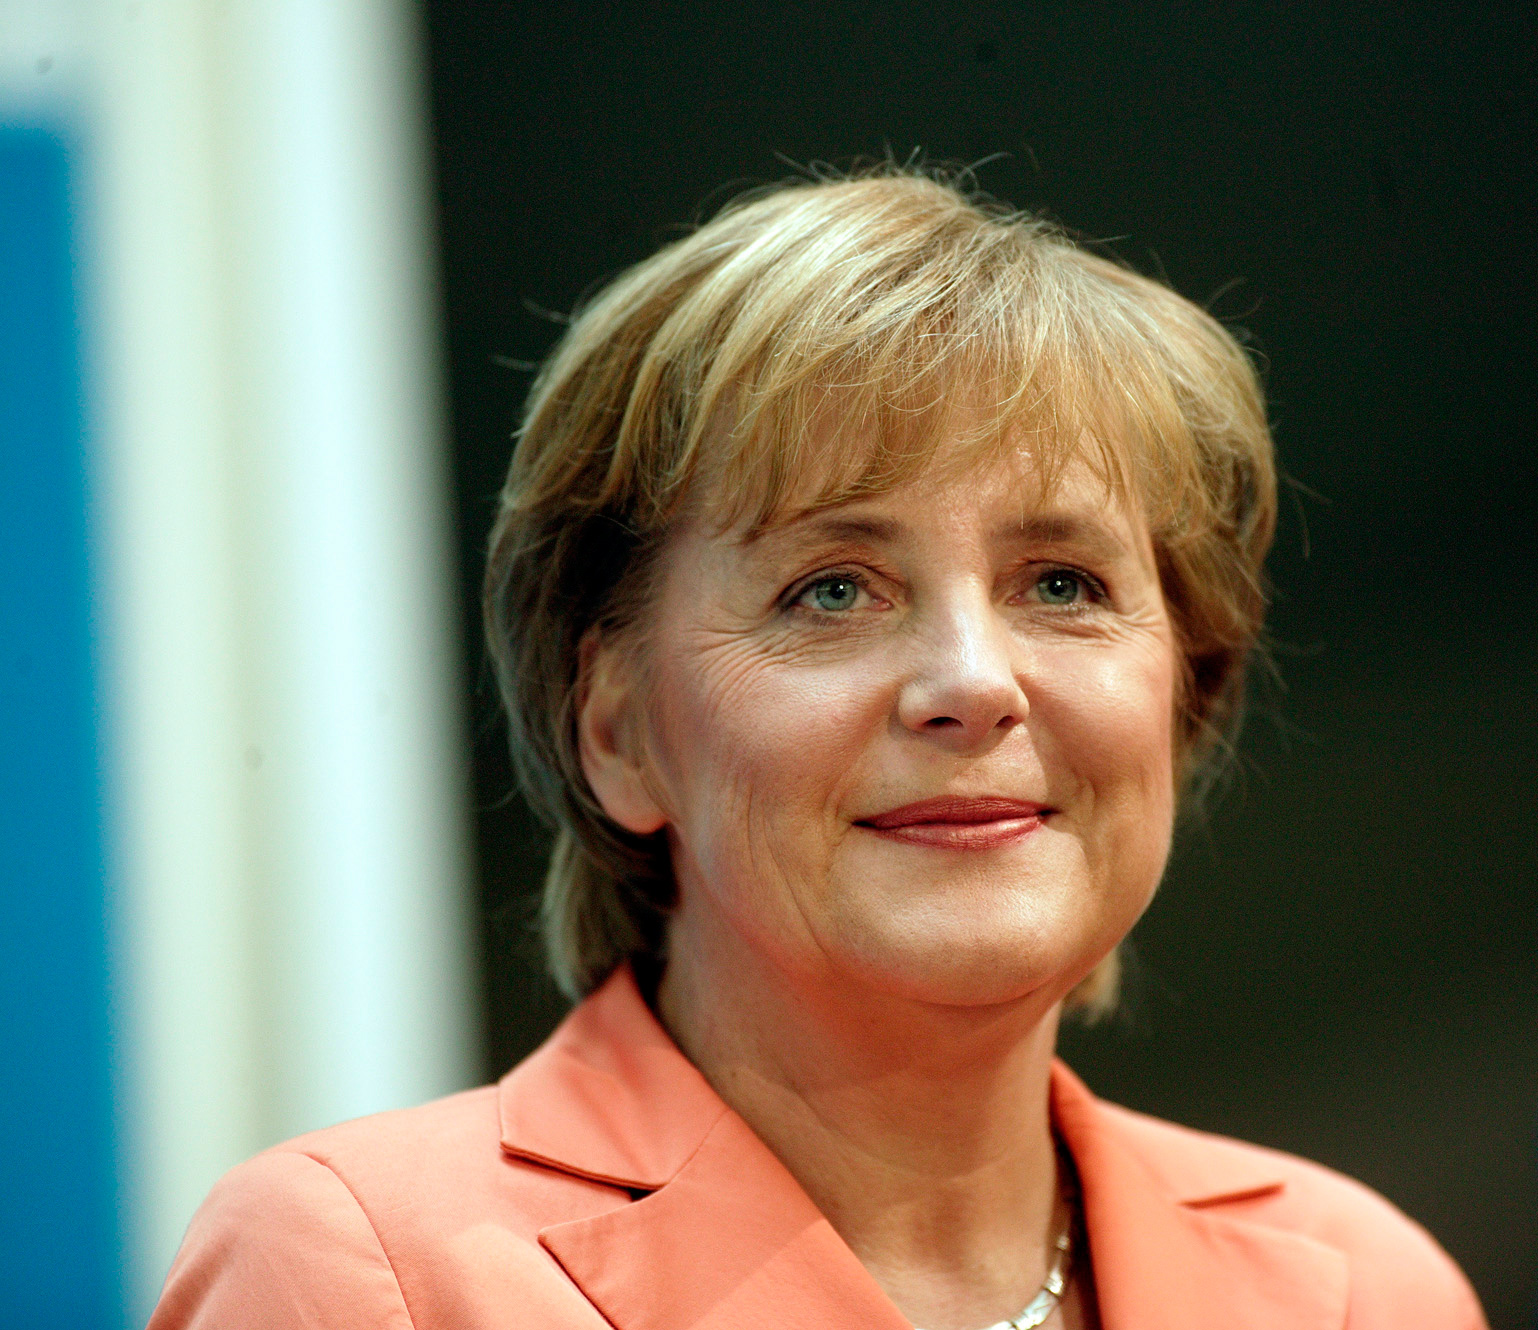 Angela Merkel becomes the first female Chancellor of Germany